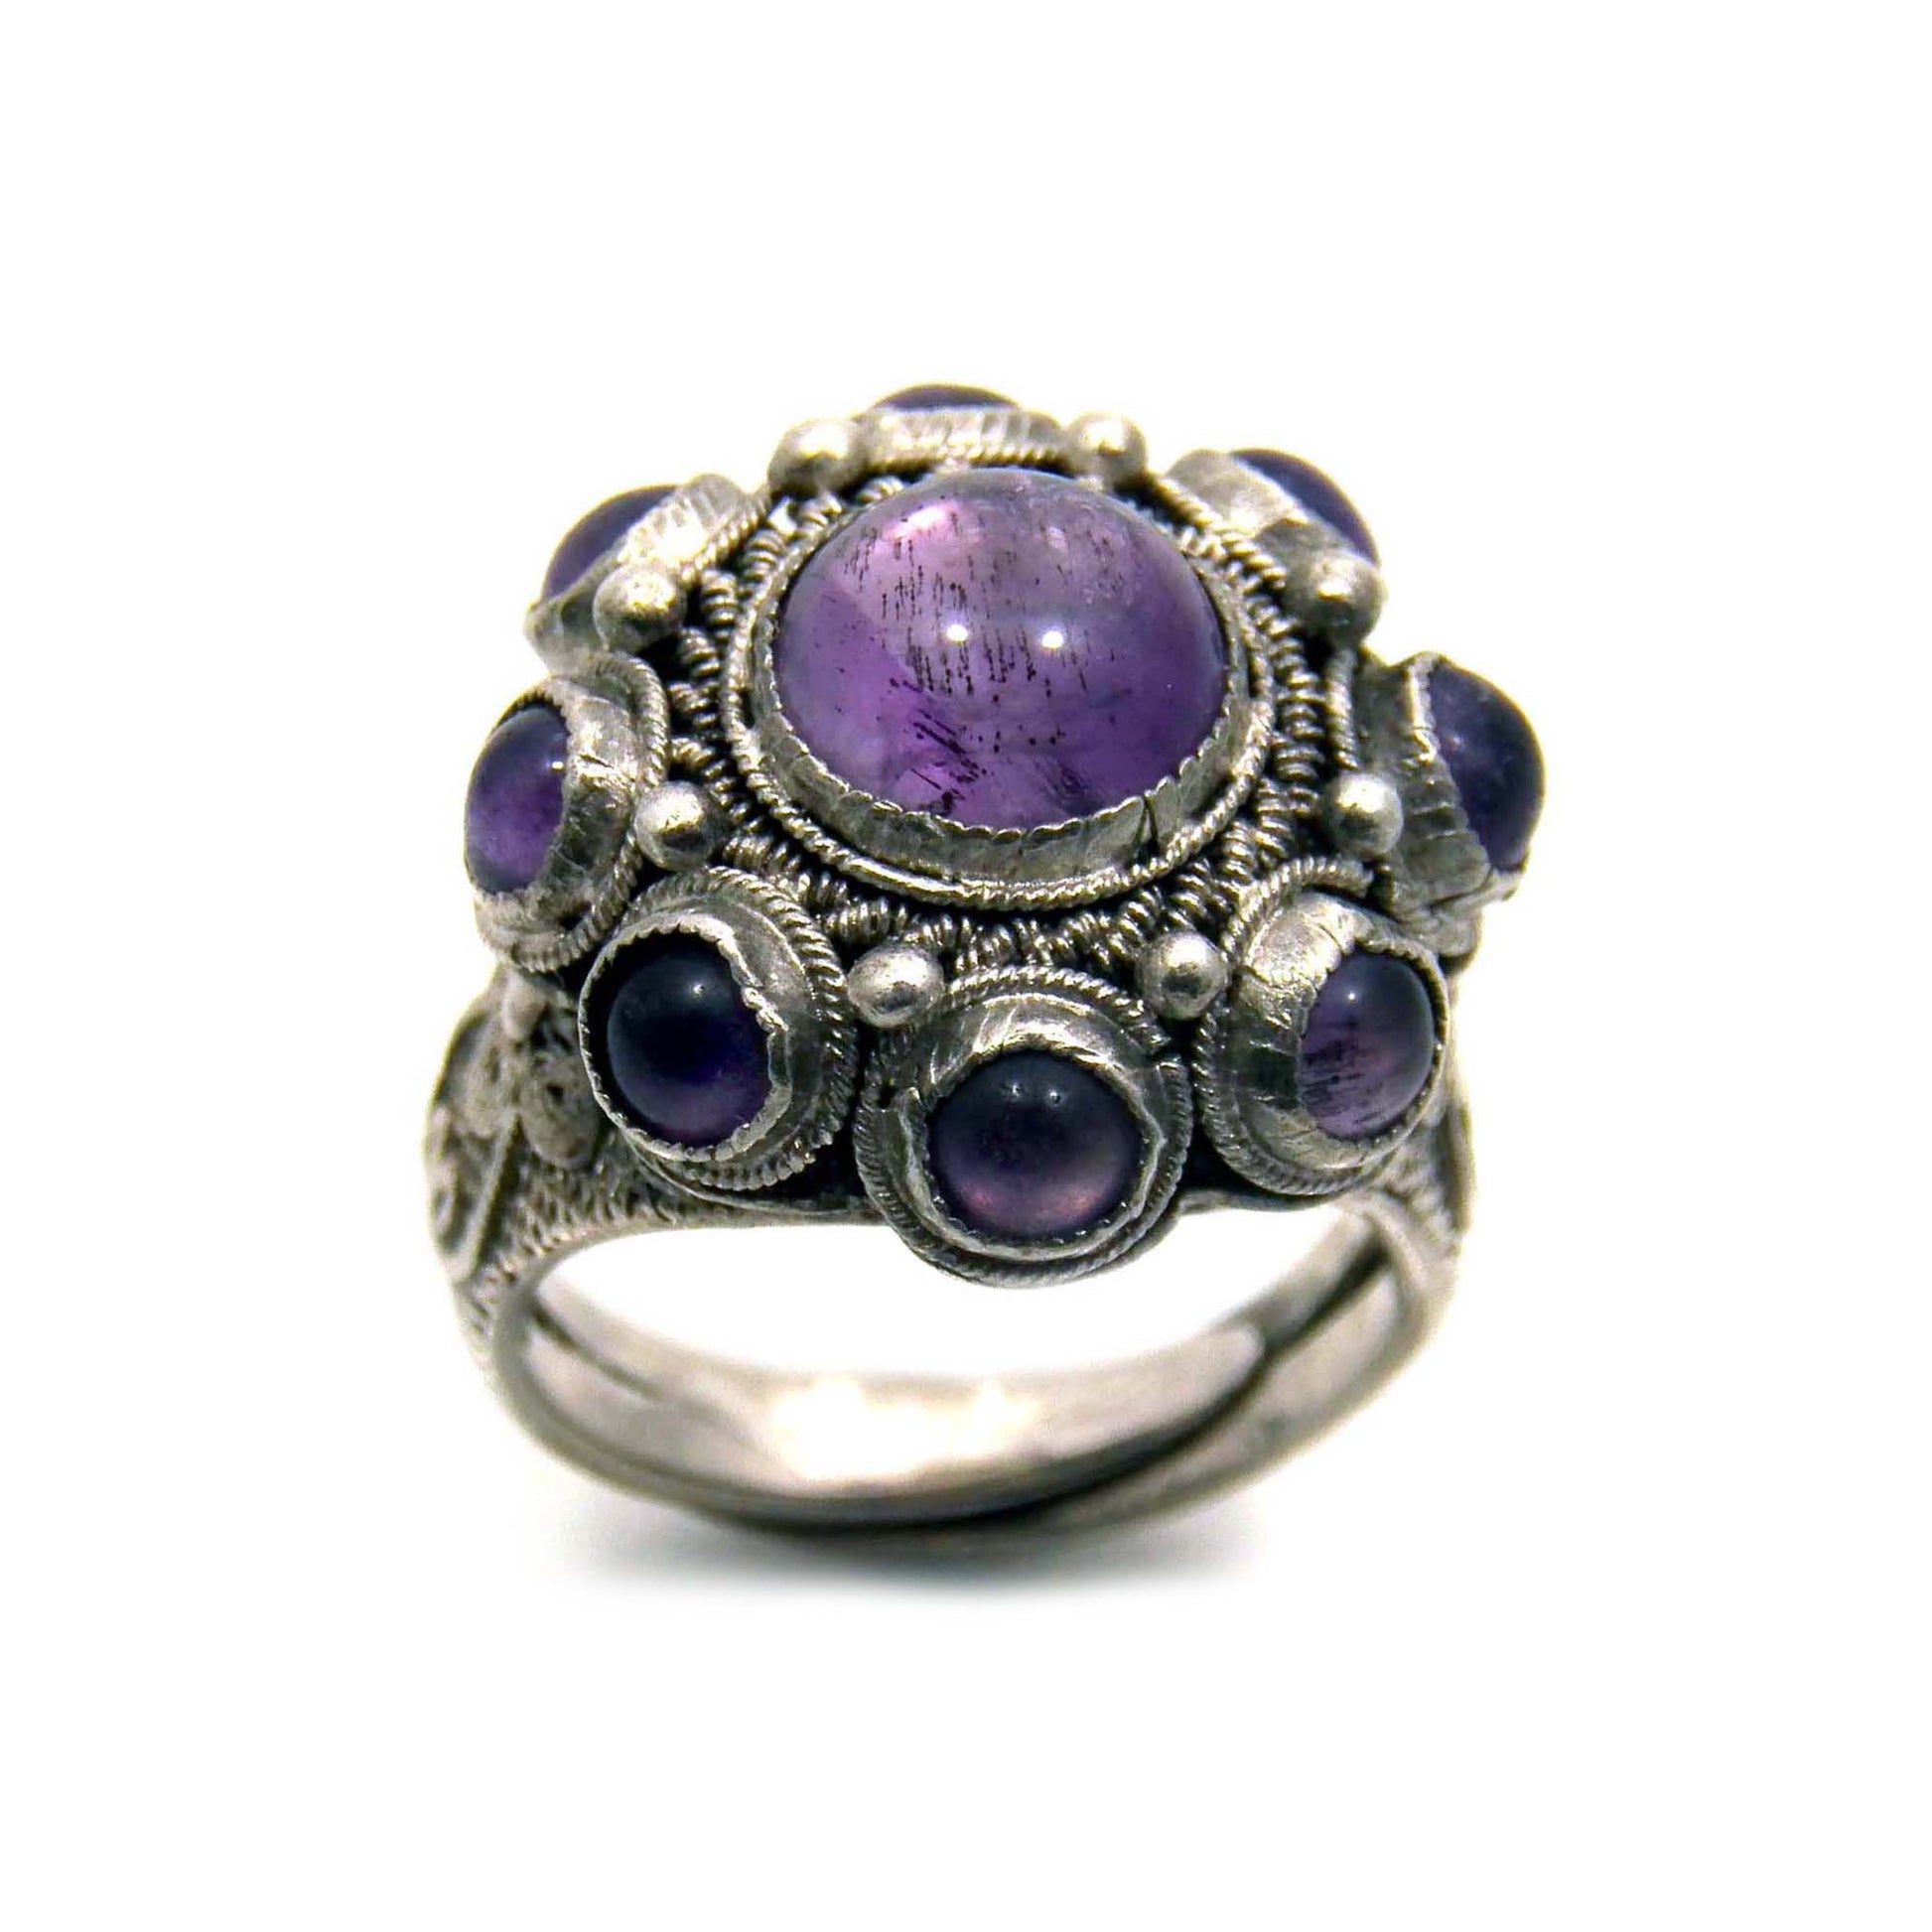 Antique Chinese silver filigree ring with amethyst